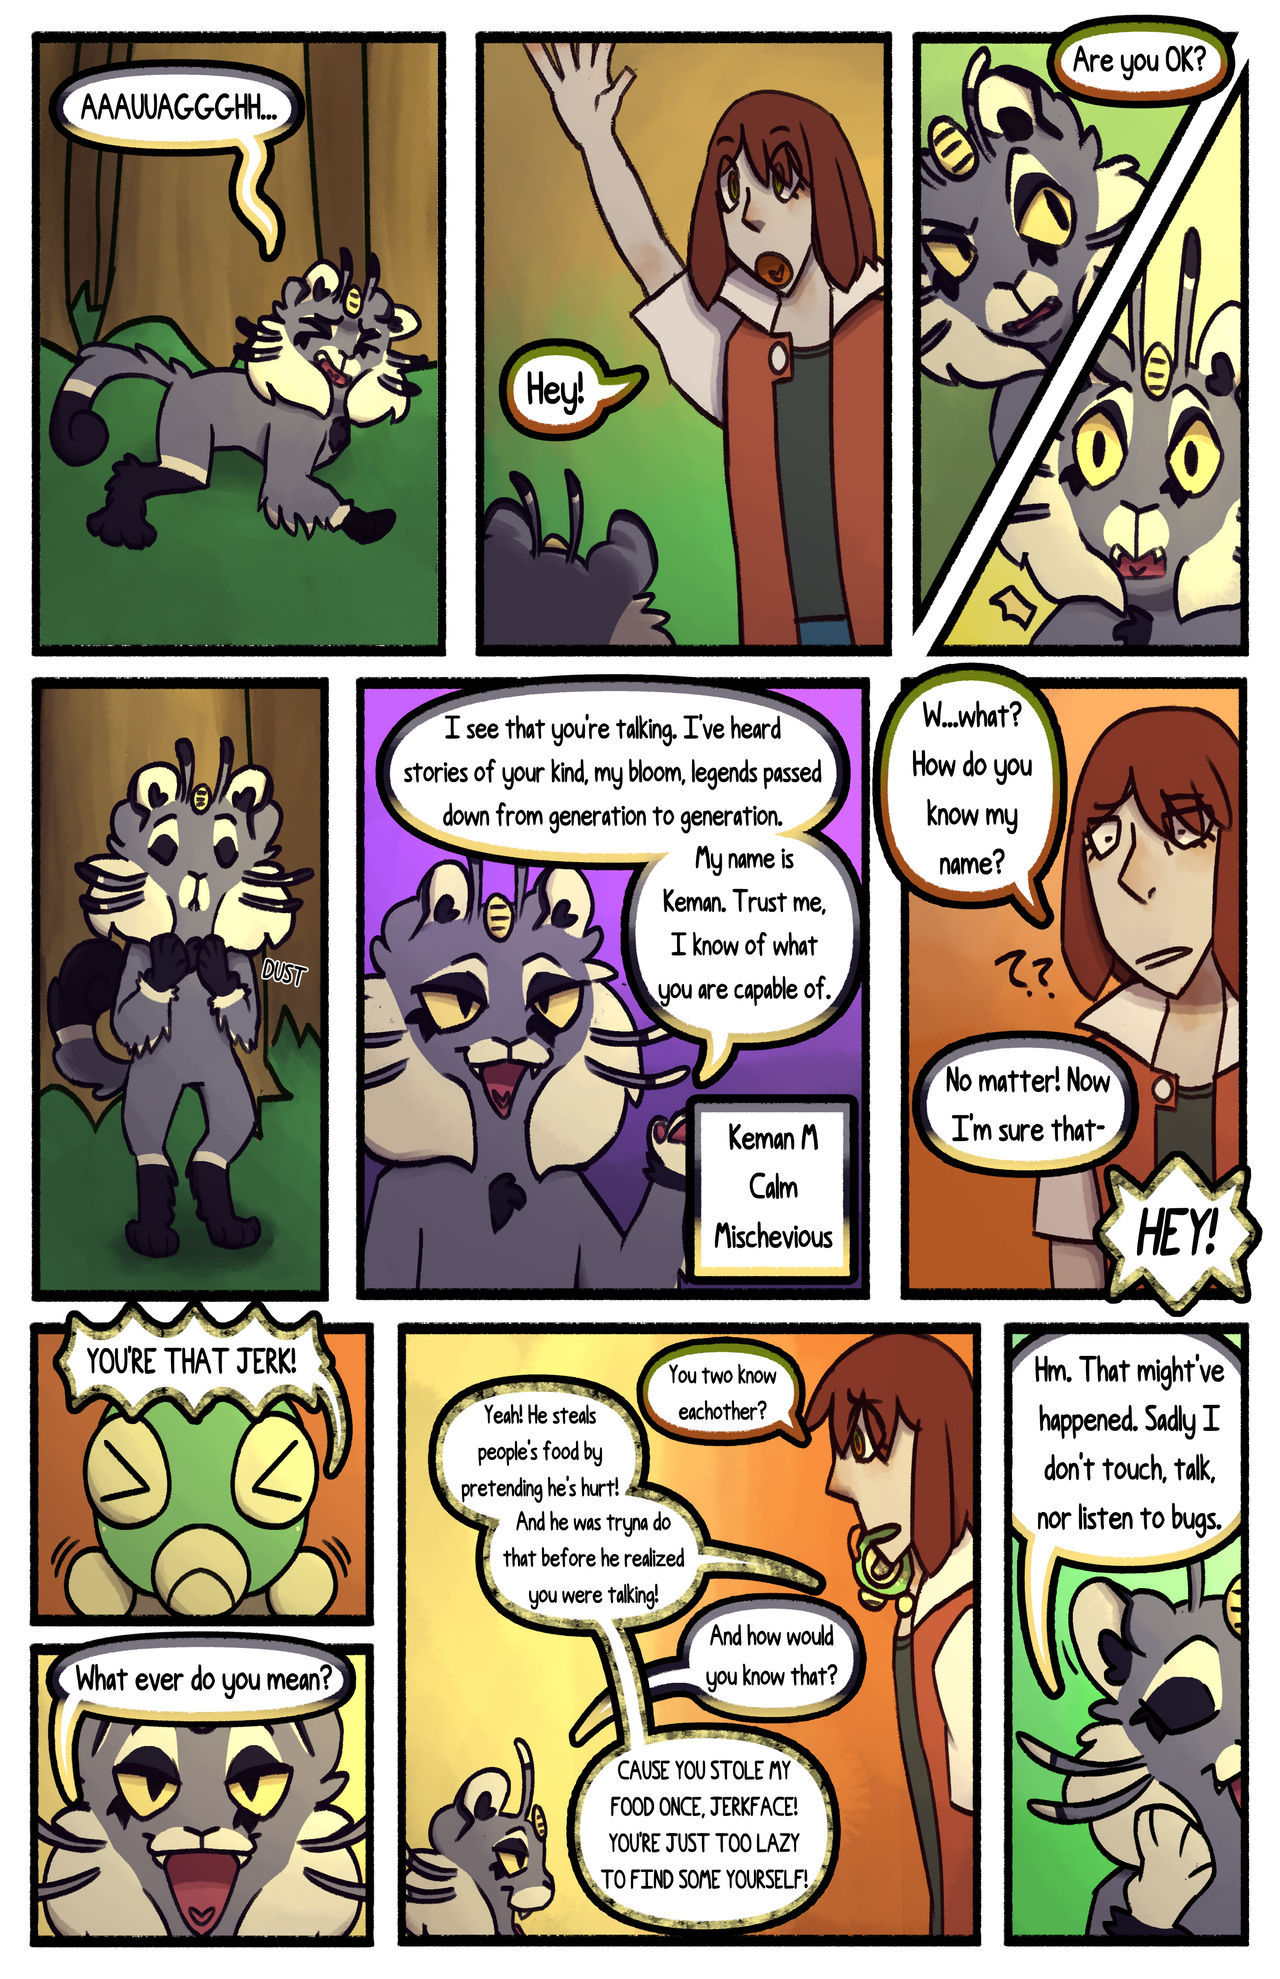 bloom__an_ultra_moon_nuzlocke___chapter_2__page_3_by_zombie_zcorge_dfimwl8-fullview.jpg